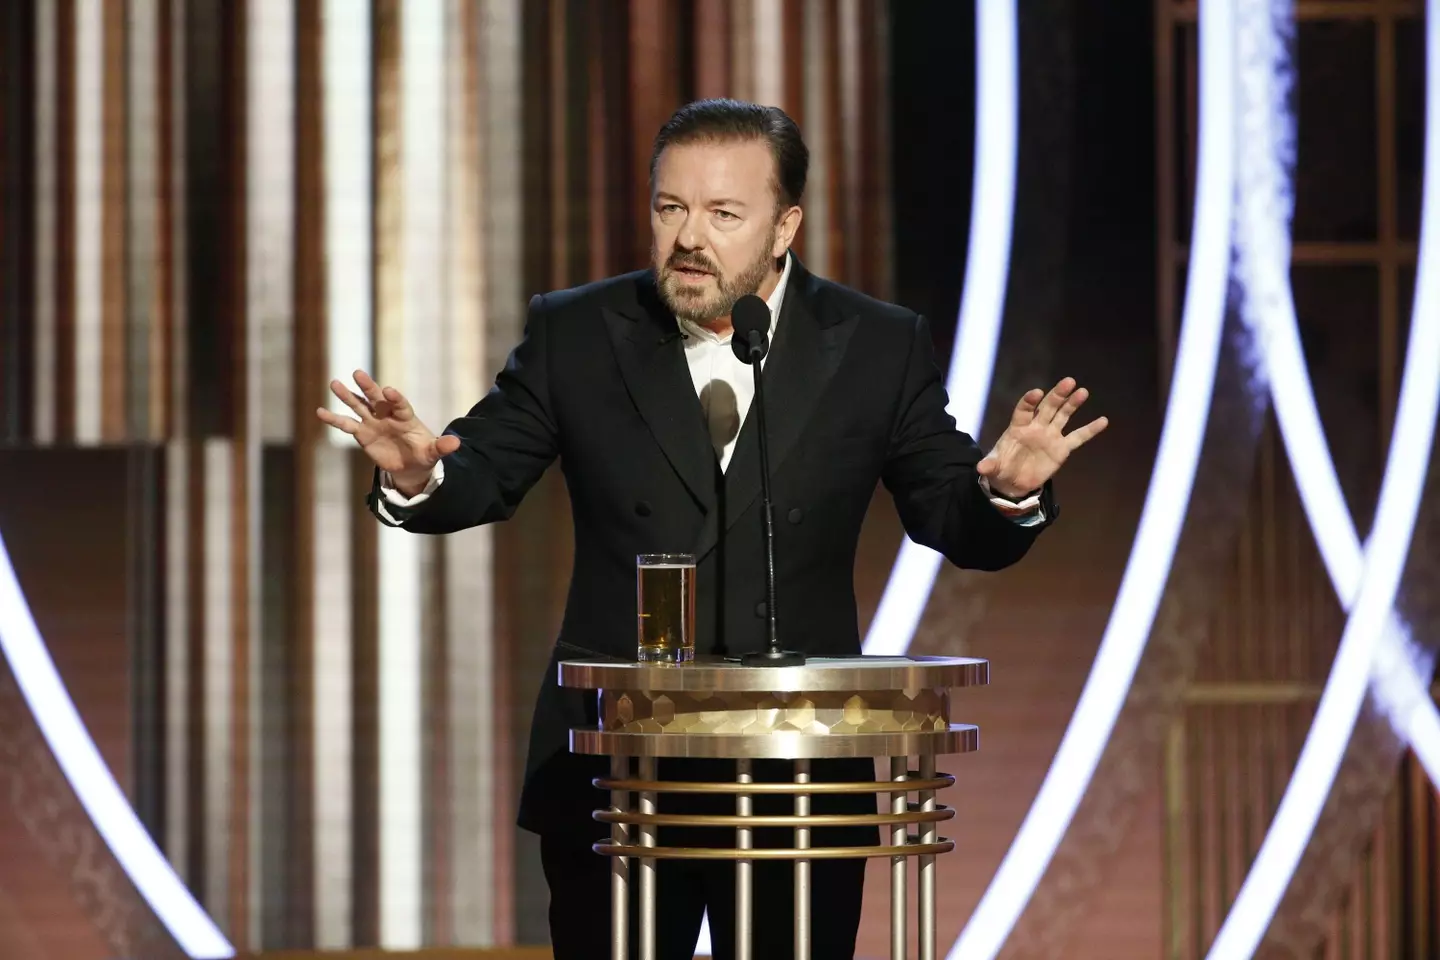 Ricky Gervais hosted his last Golden Globes in 2020.